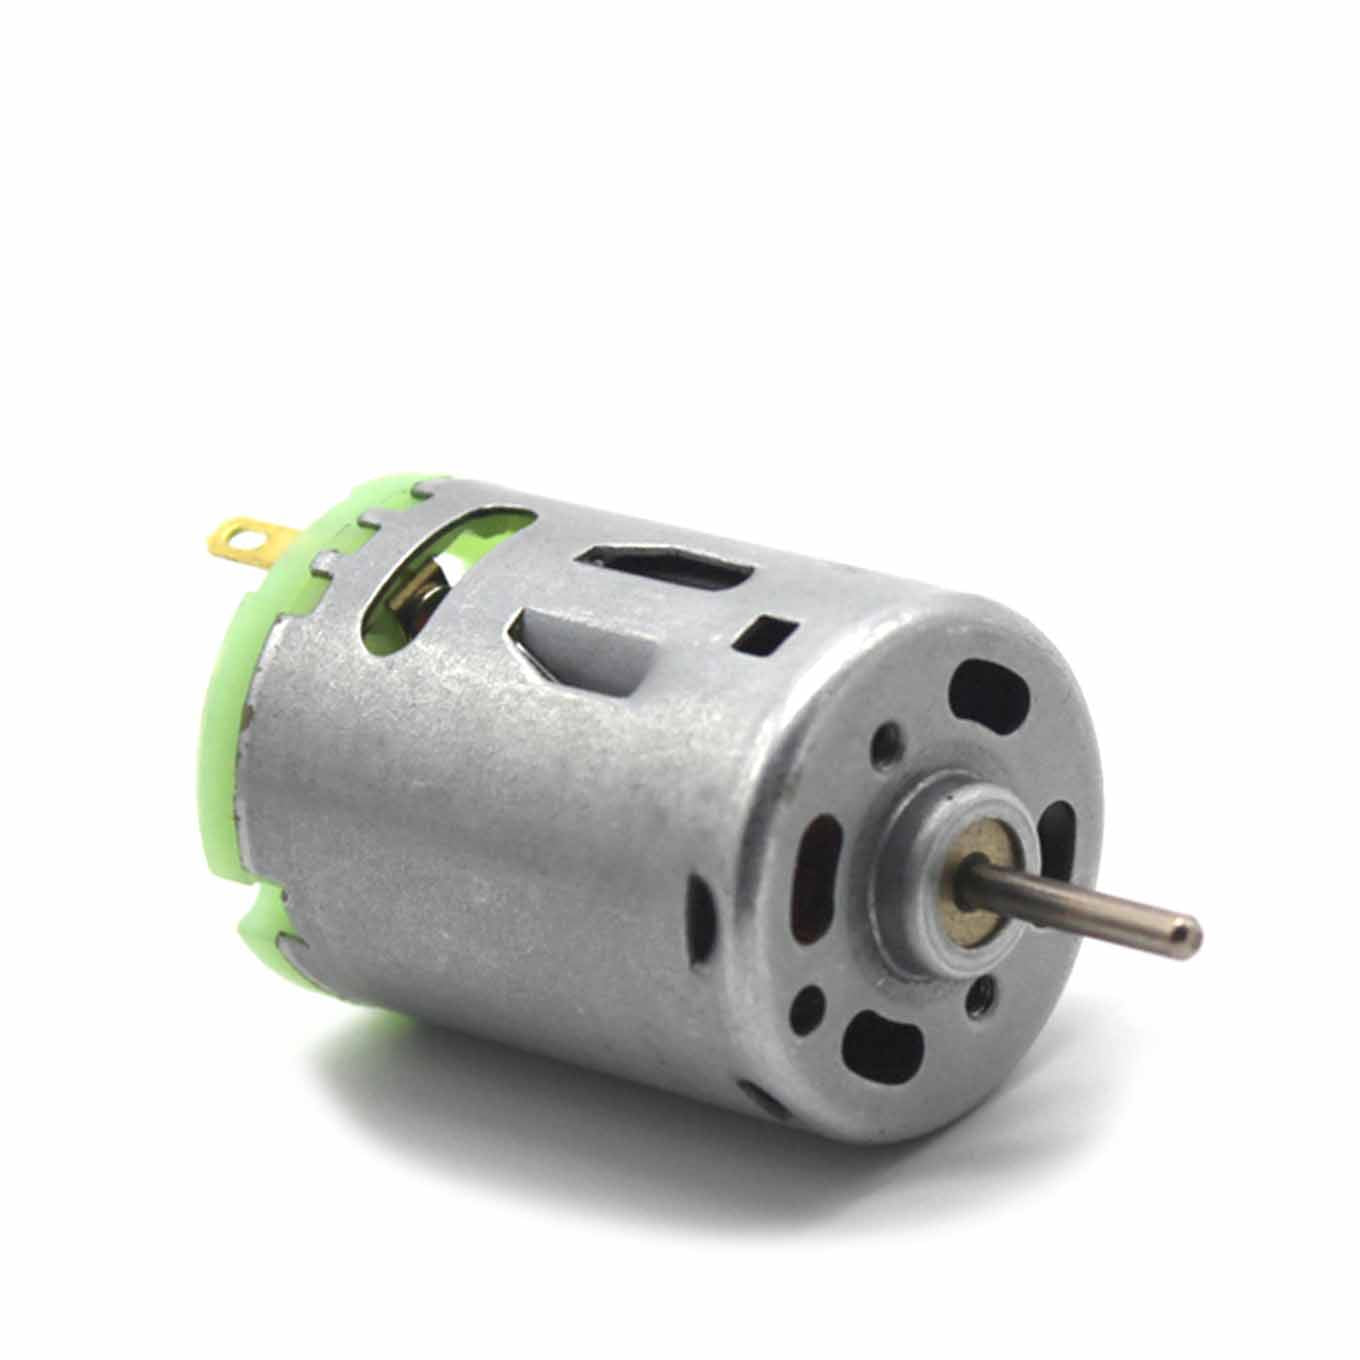 R-385 Micro DC High Speed Motor Small Motor 24V 8000RPM Forward and Reverse  Adjustable Large Torque Motor DC Electric Motor